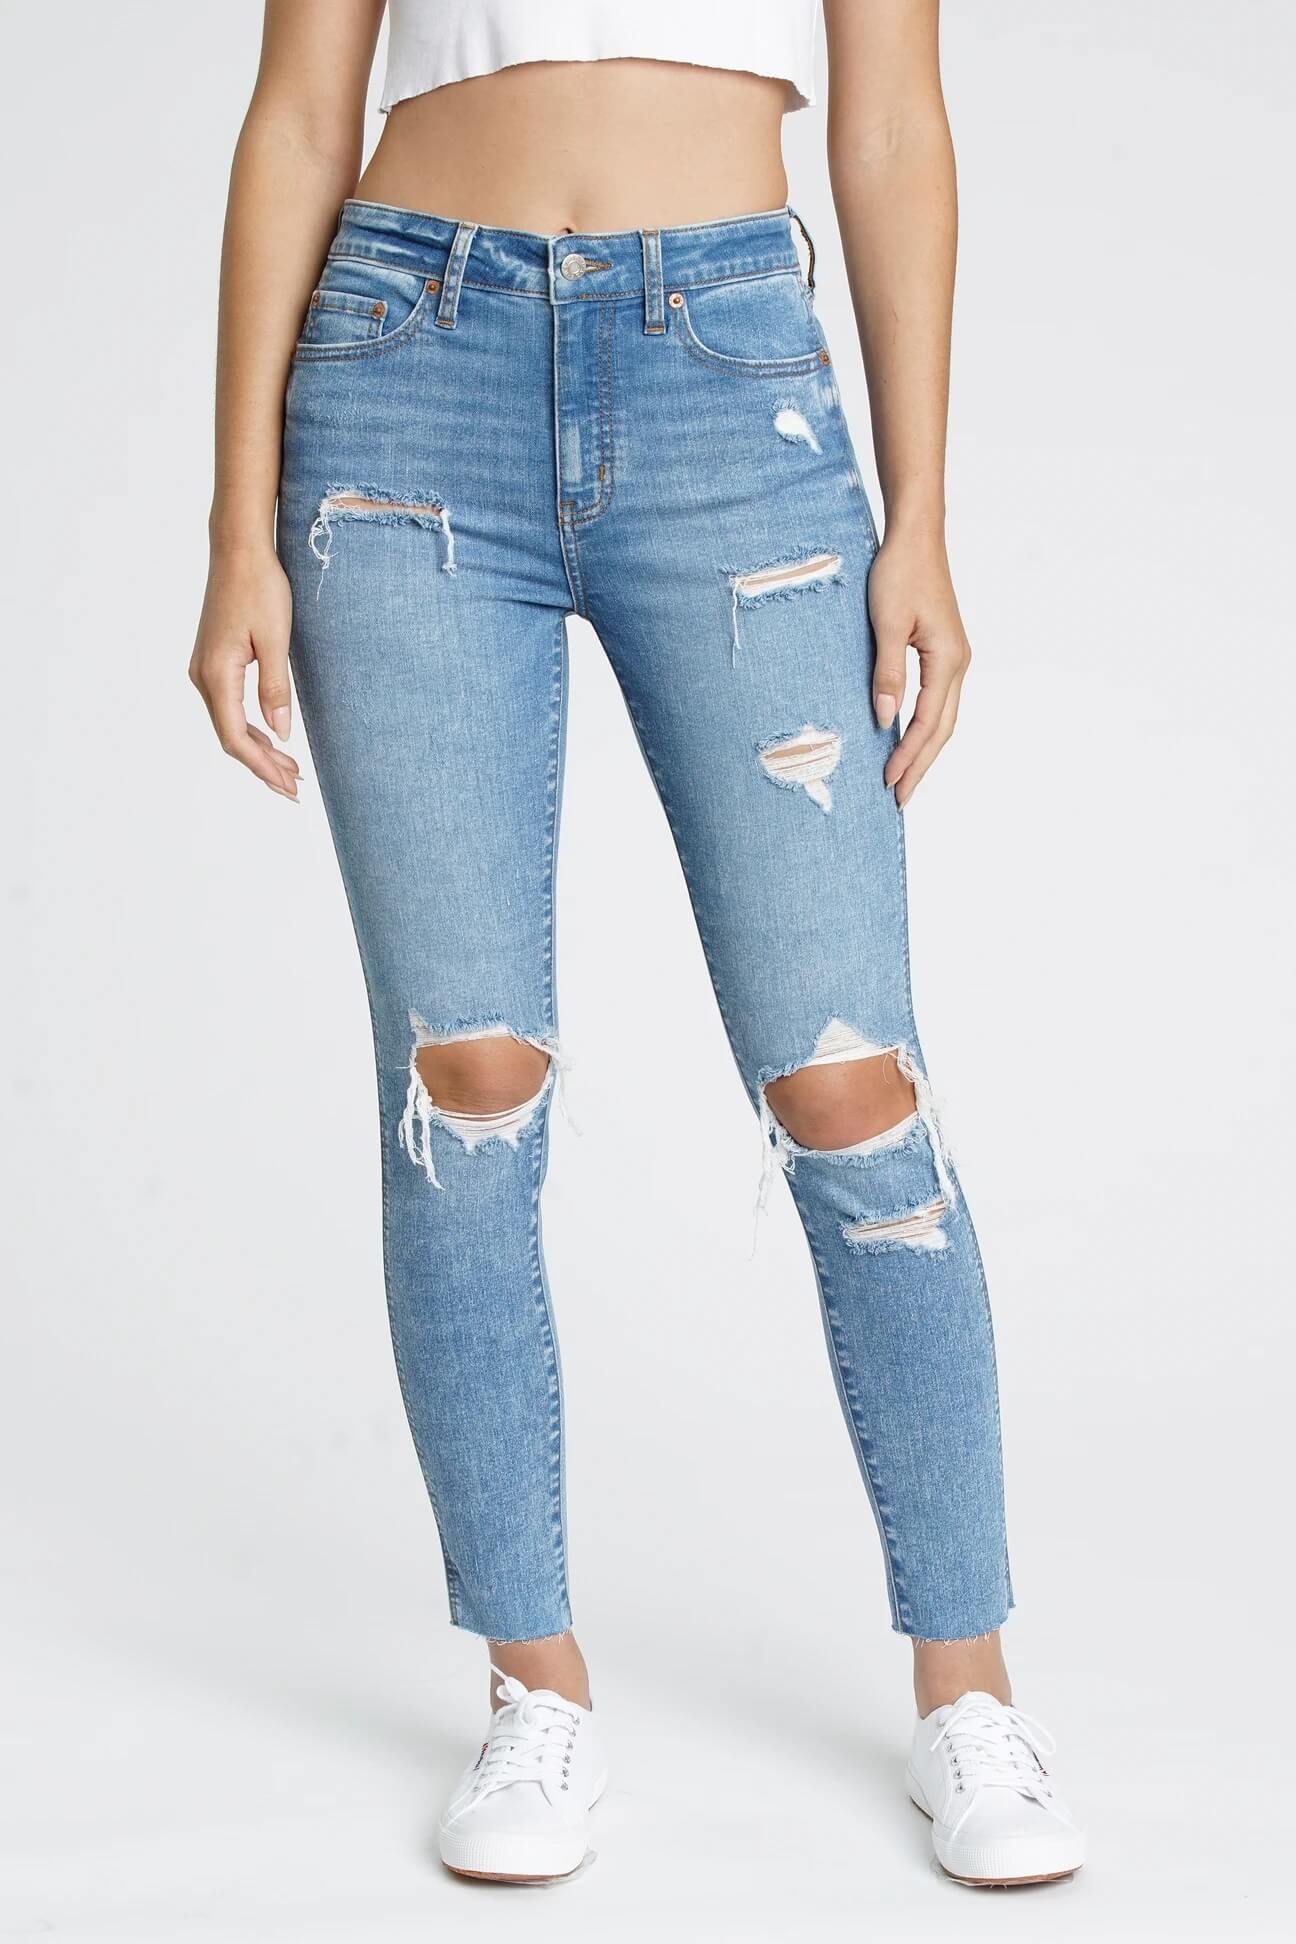 Money Maker Skinny High Waist Jeans Distressed  Light Wash - Skies for Miles